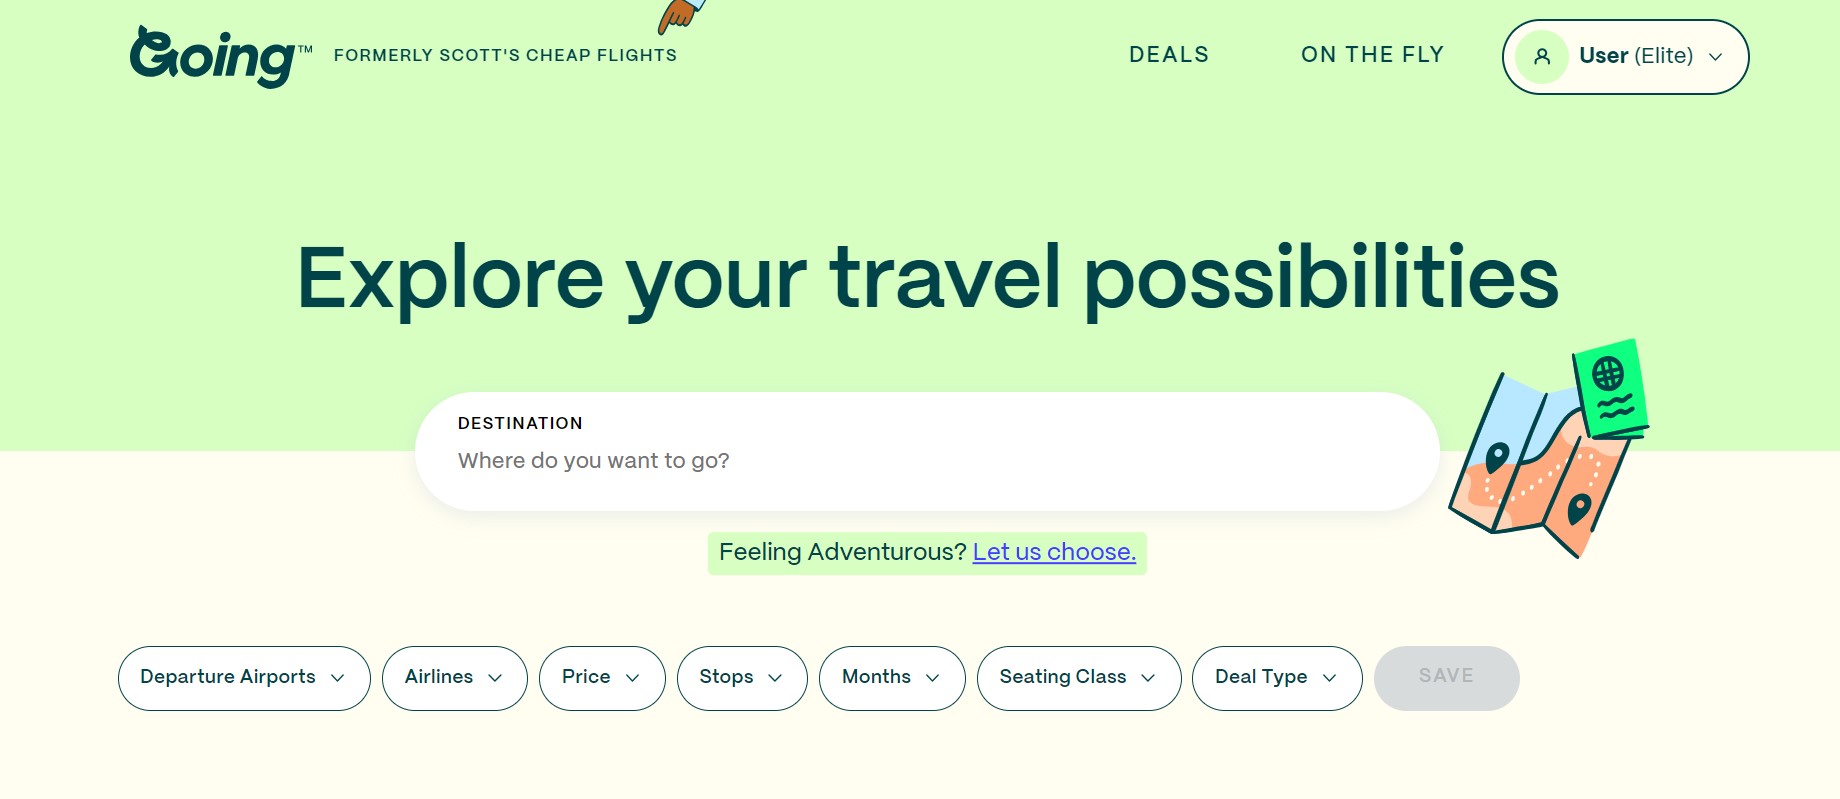 Screenshot from the Going travel website showing a search bar and filters to select